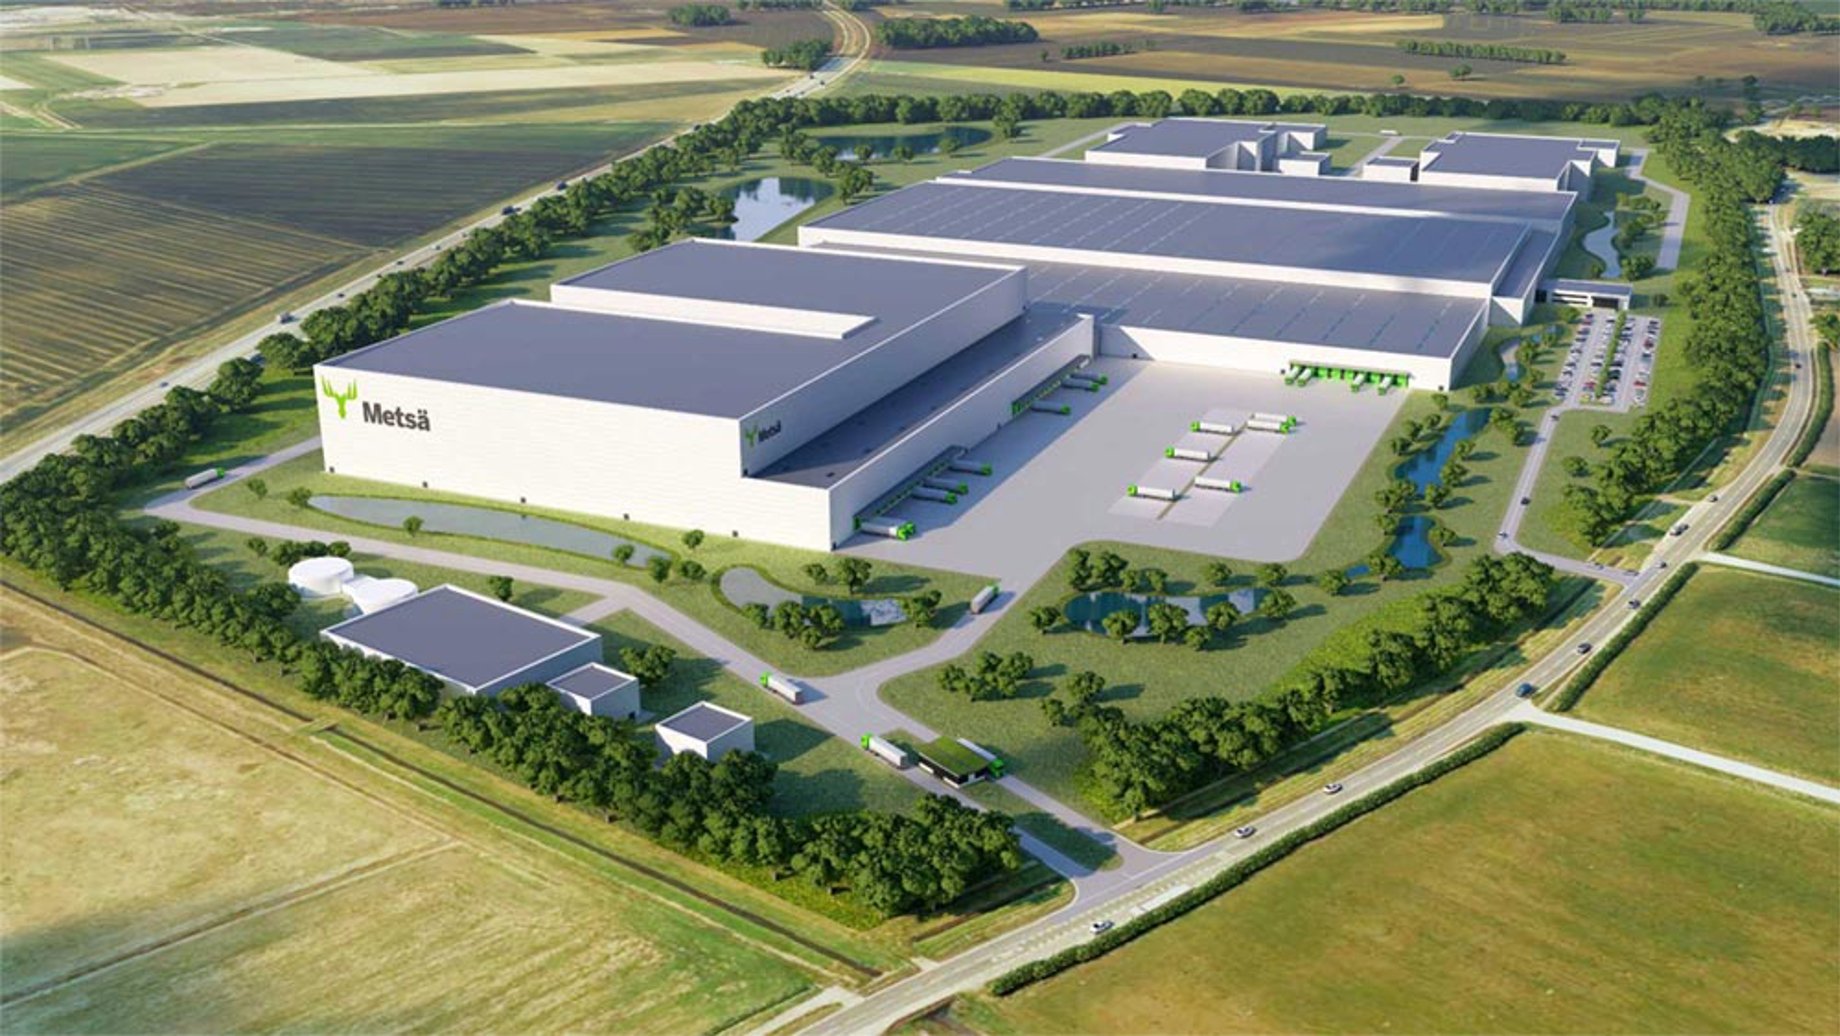 Artist's impression of the new Metsa Group paper mill